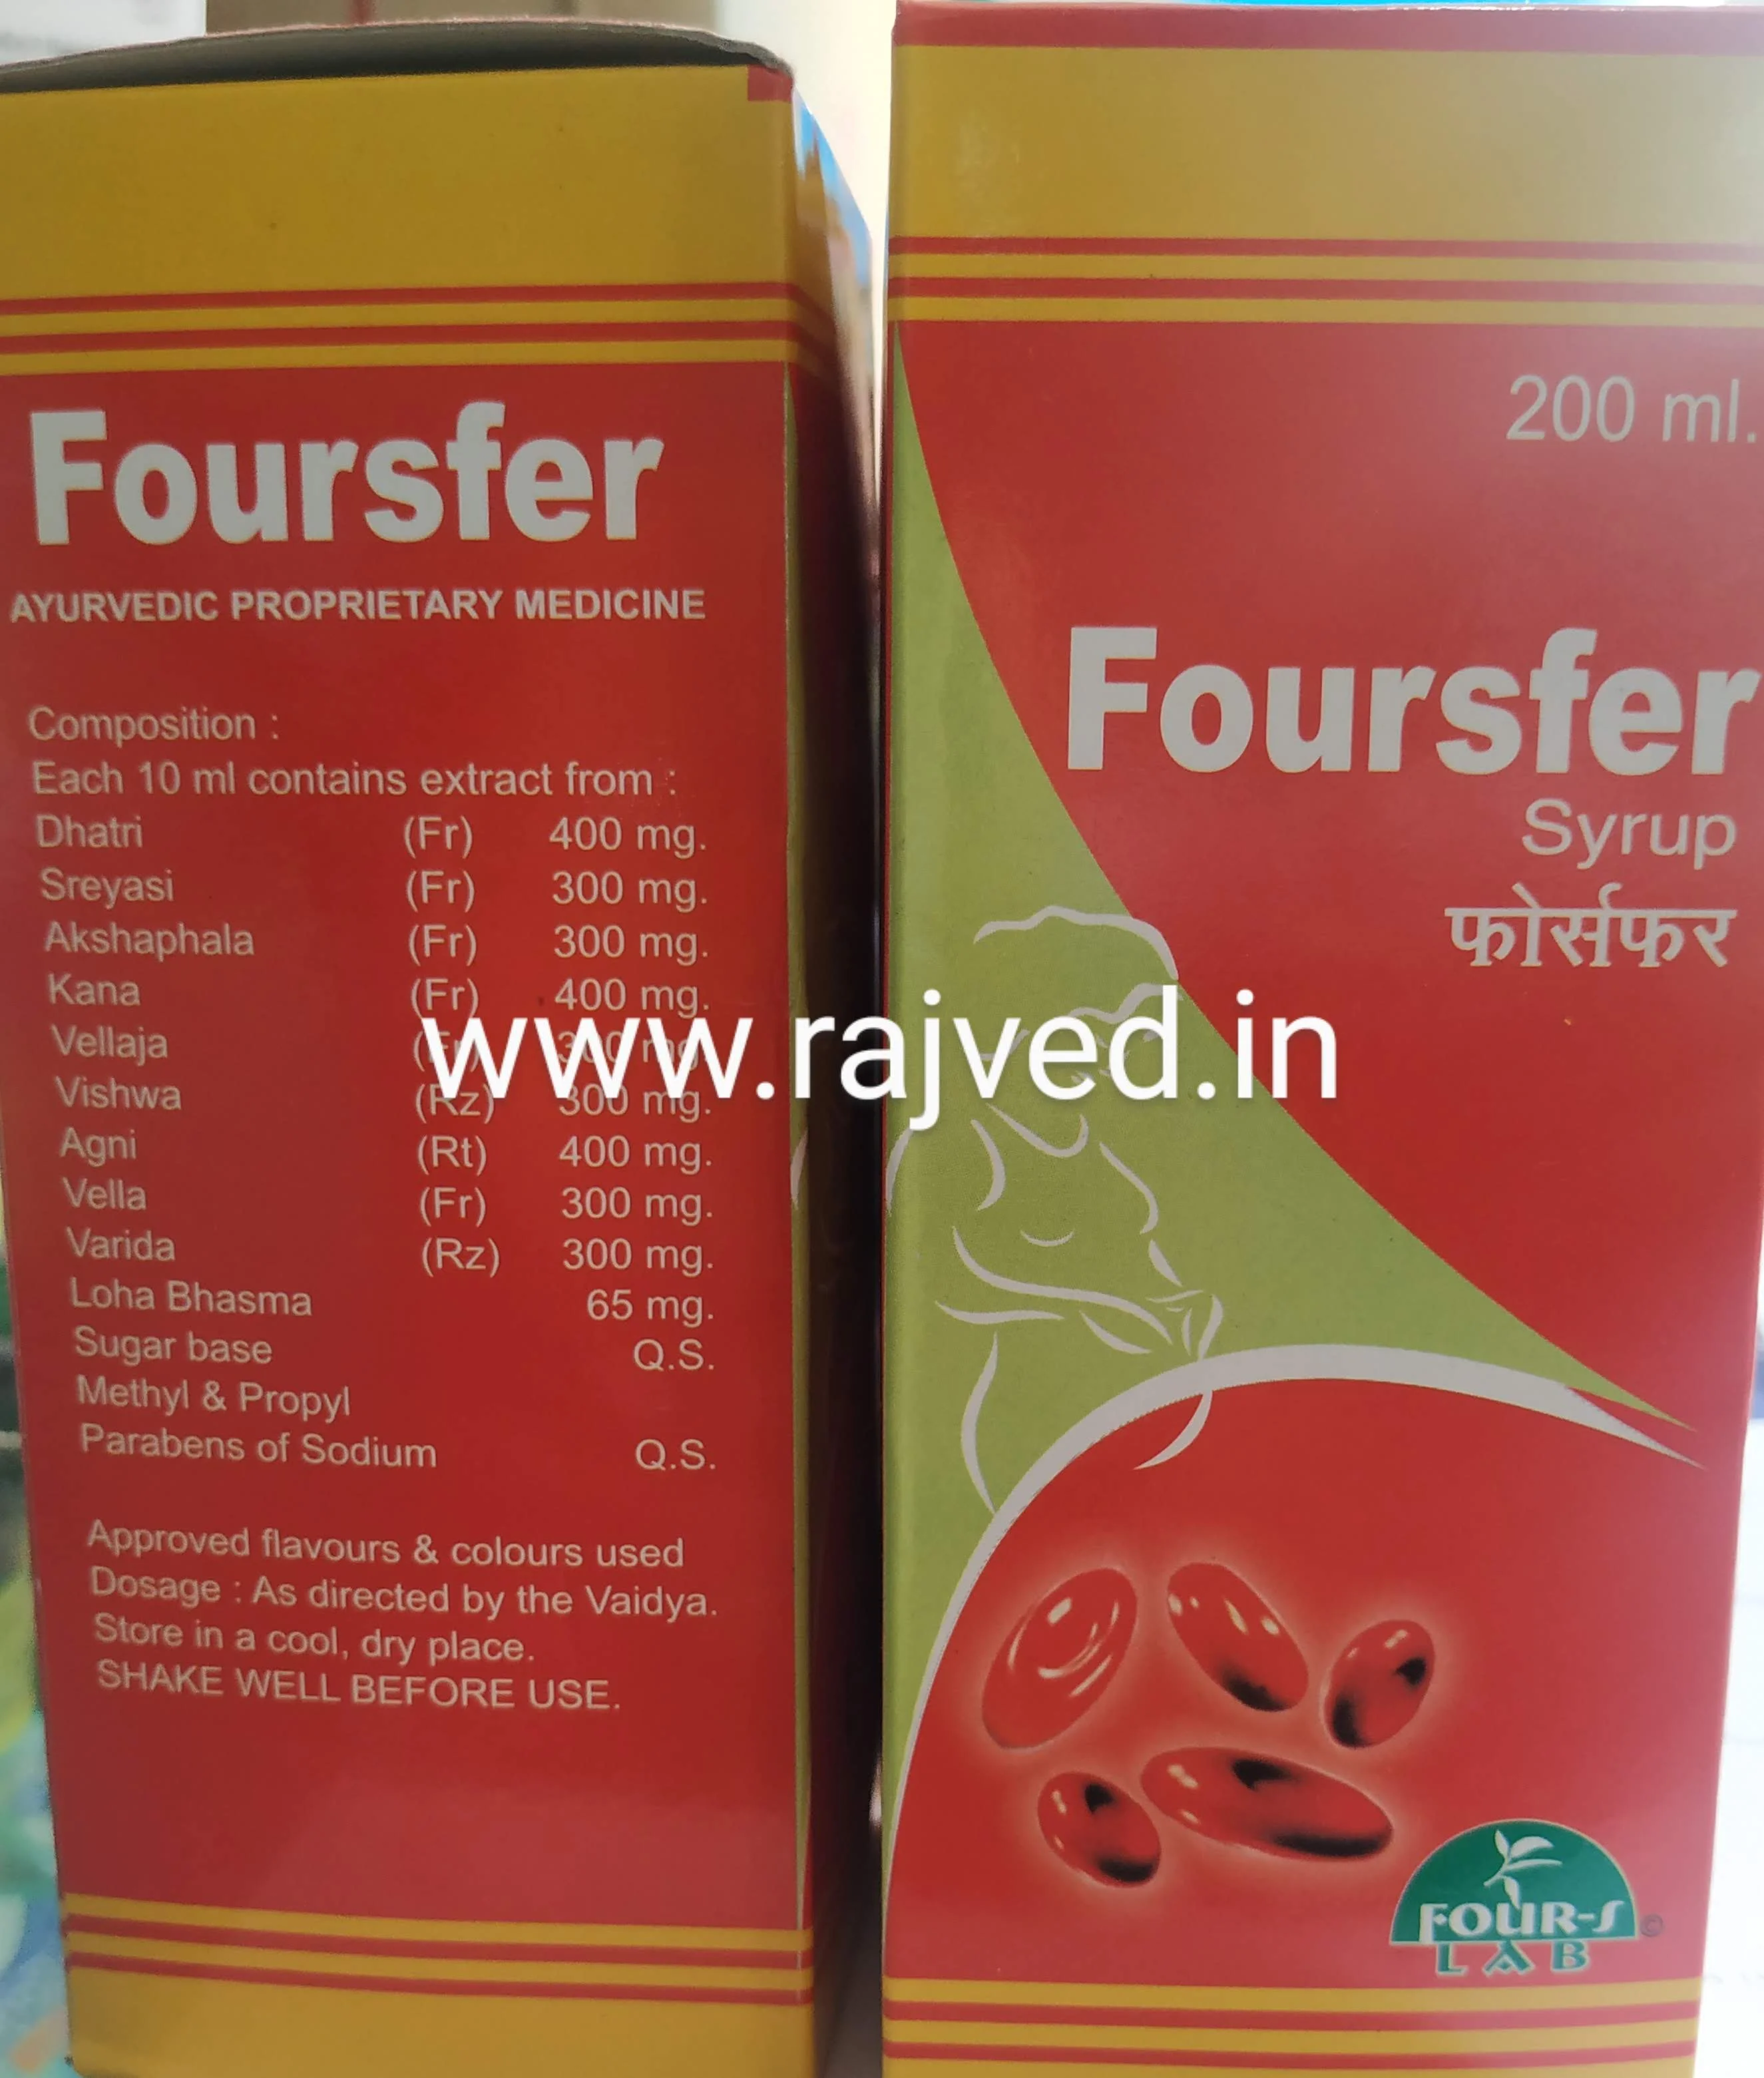 foursfer syrup 200ml upto 30% off four-s lab